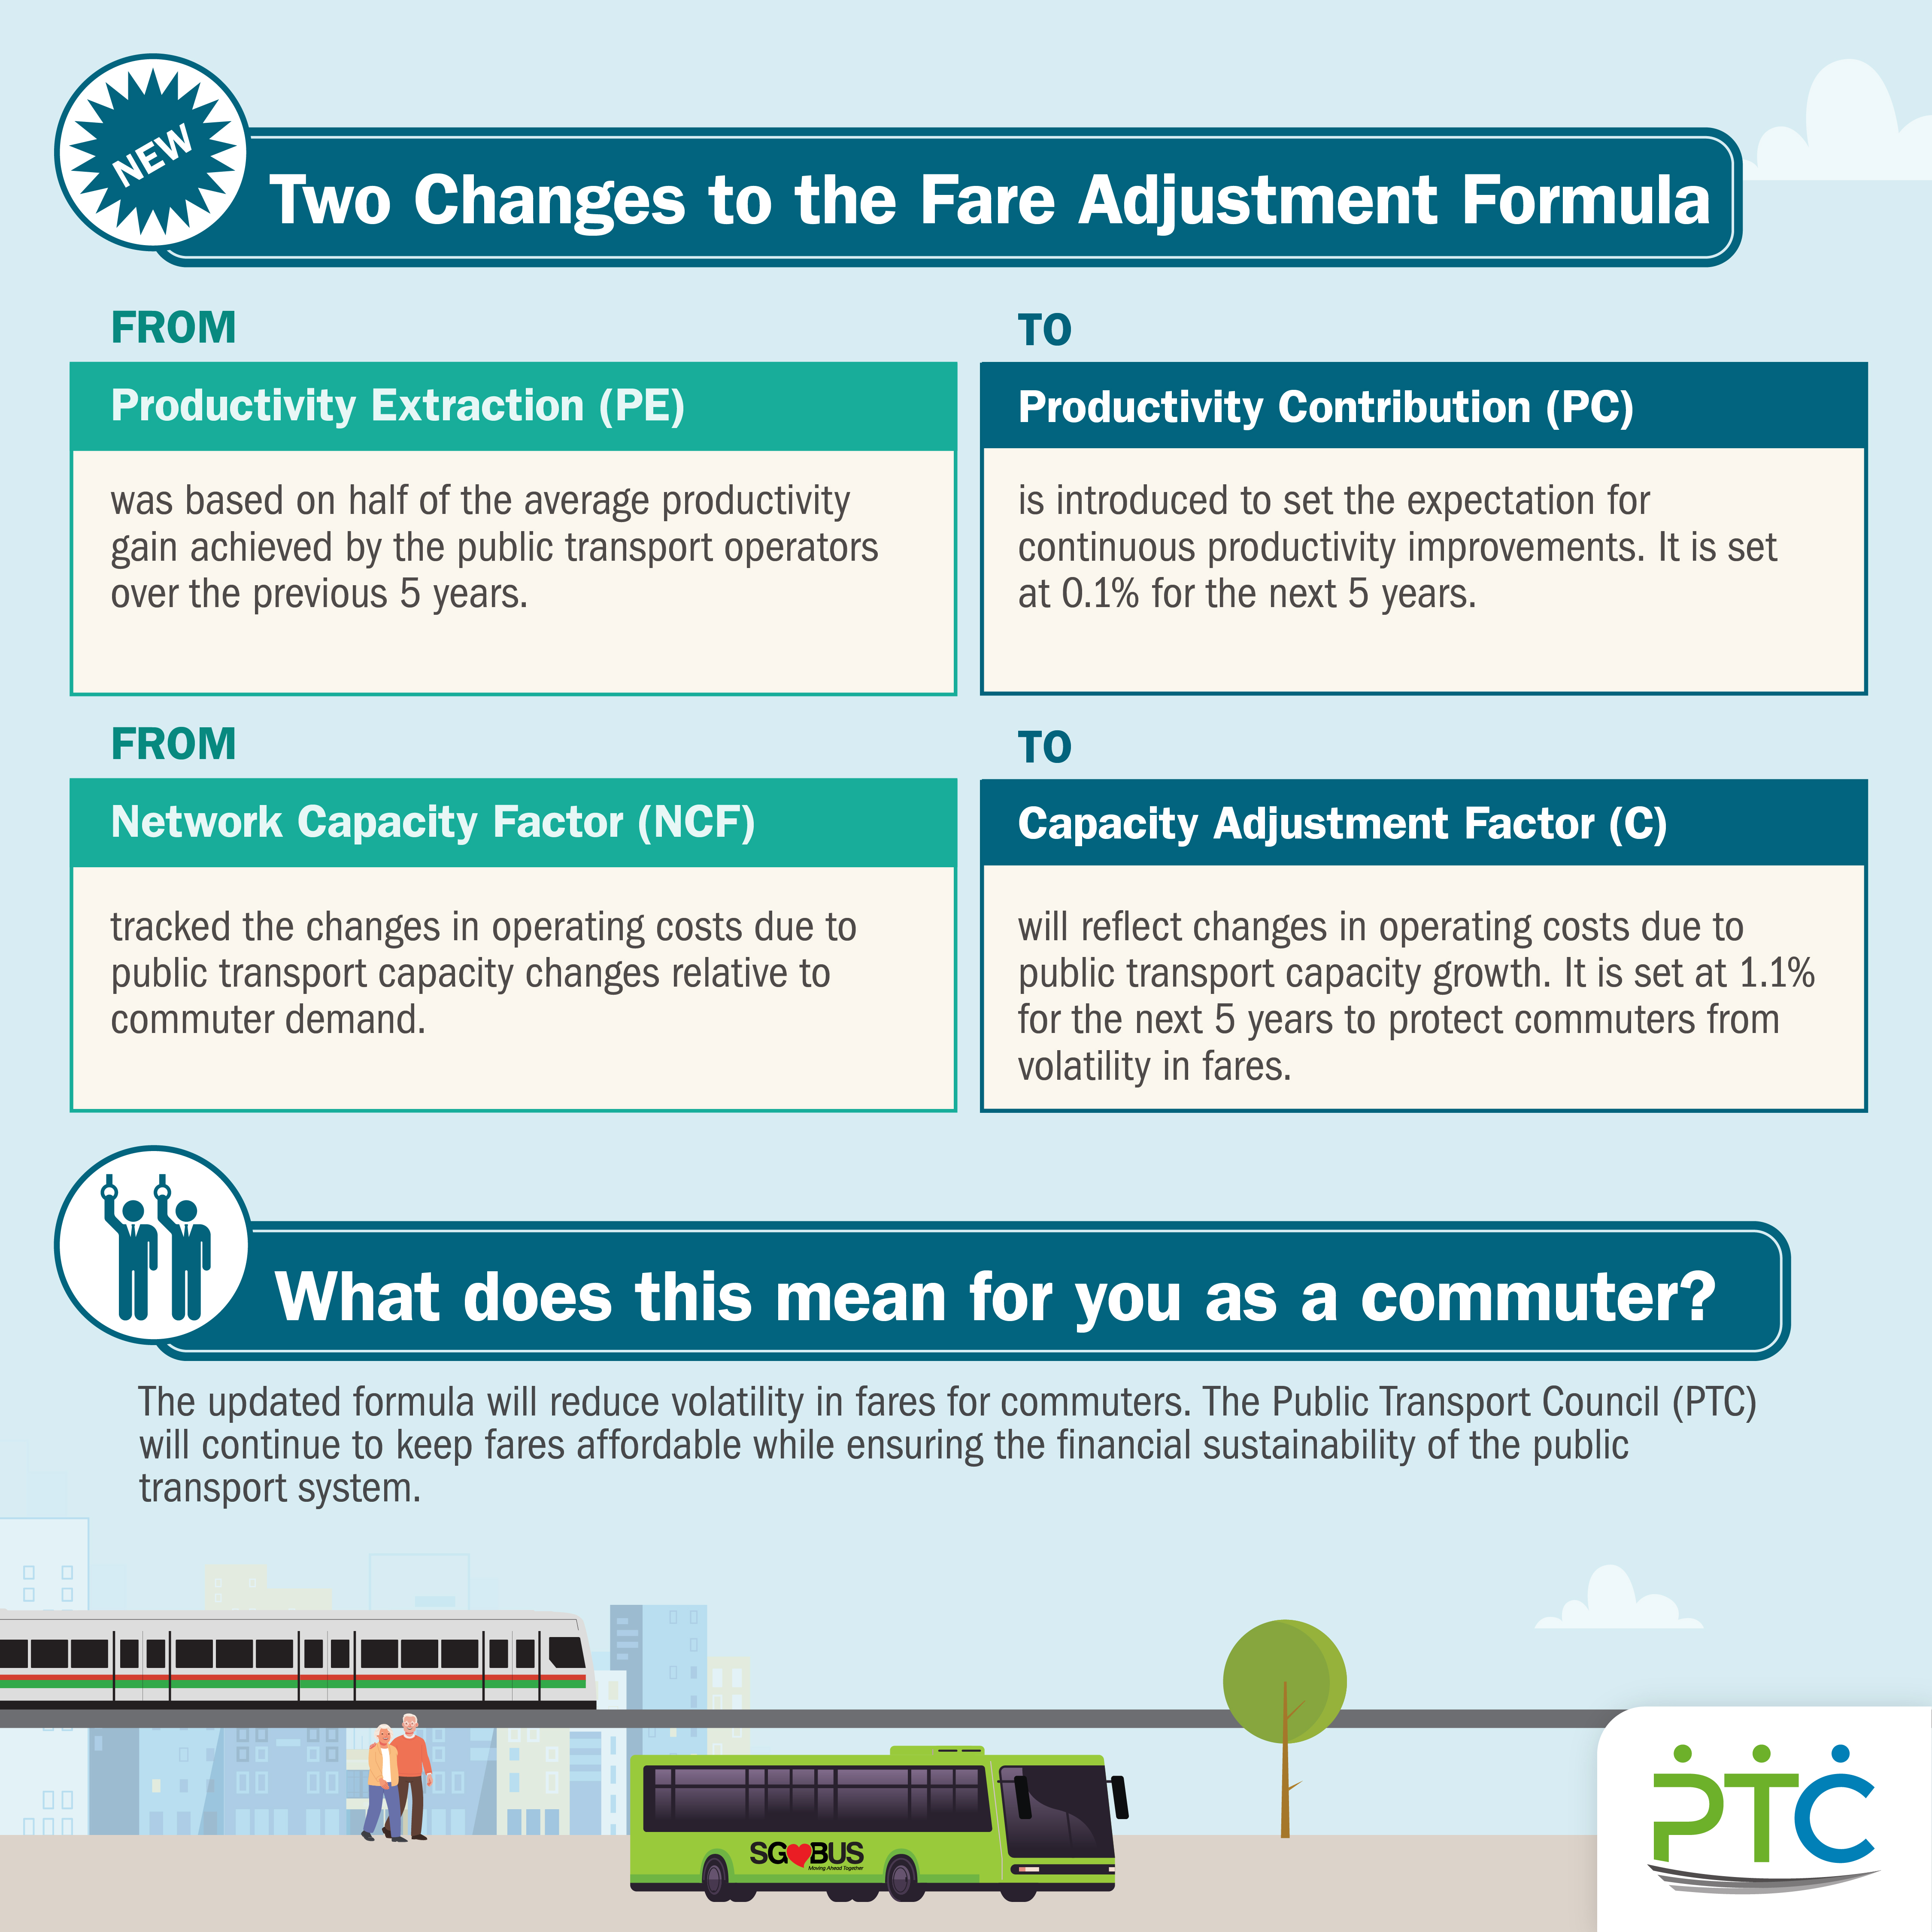 Two Changes to the Fare Adjustment Formula